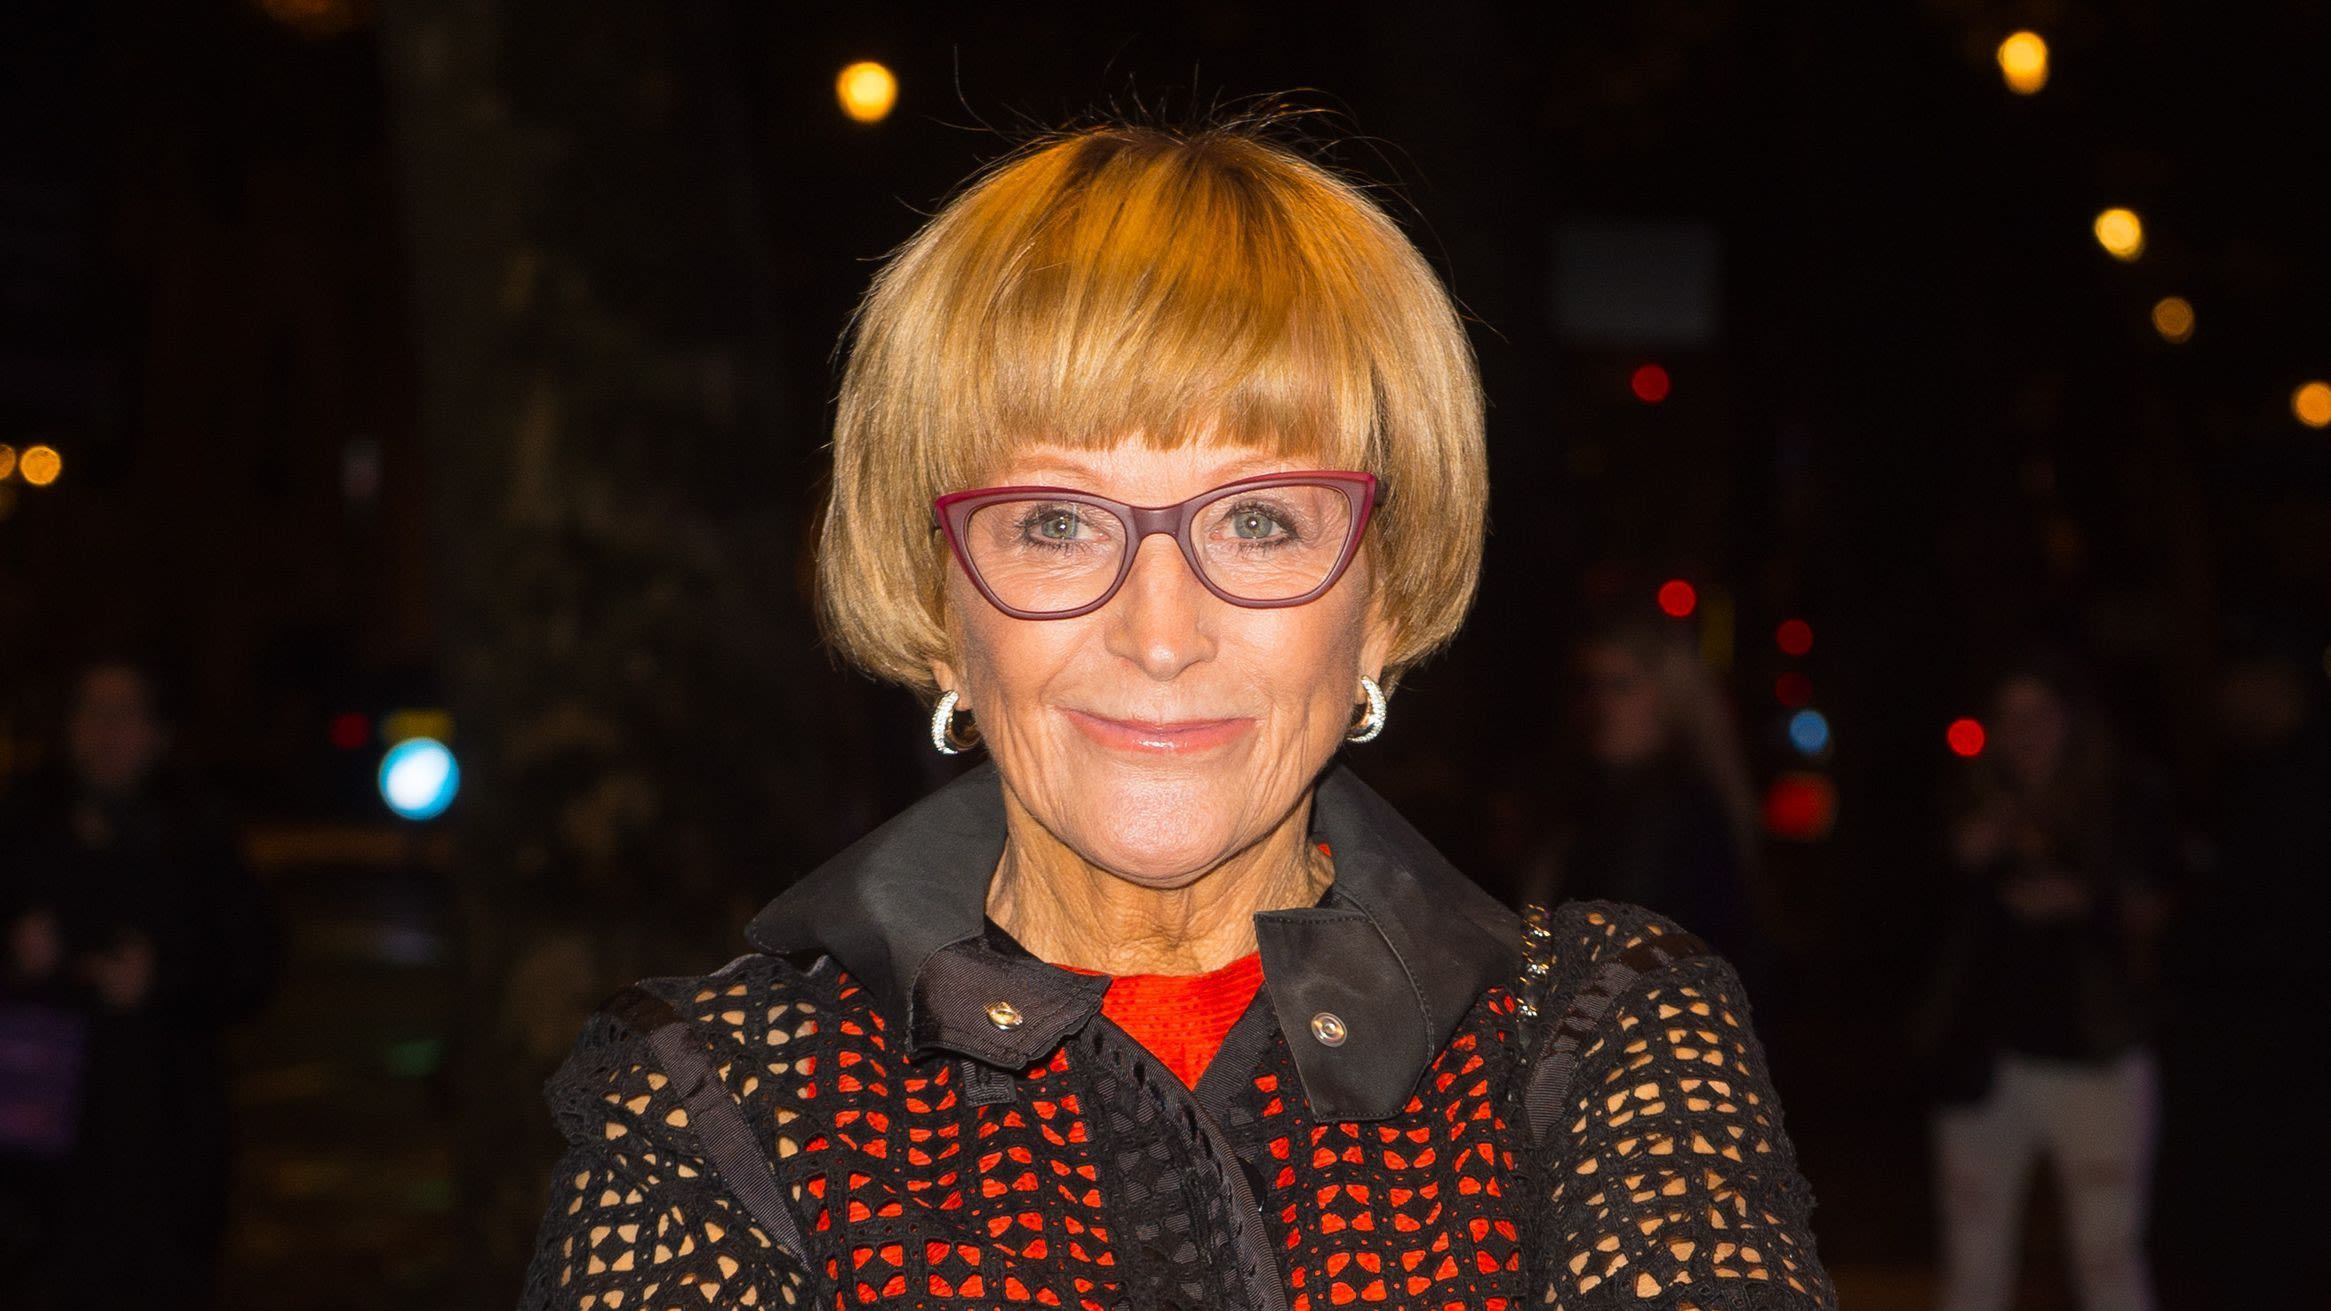 Anne Robinson 'gives away' fortune, but some other stars won't